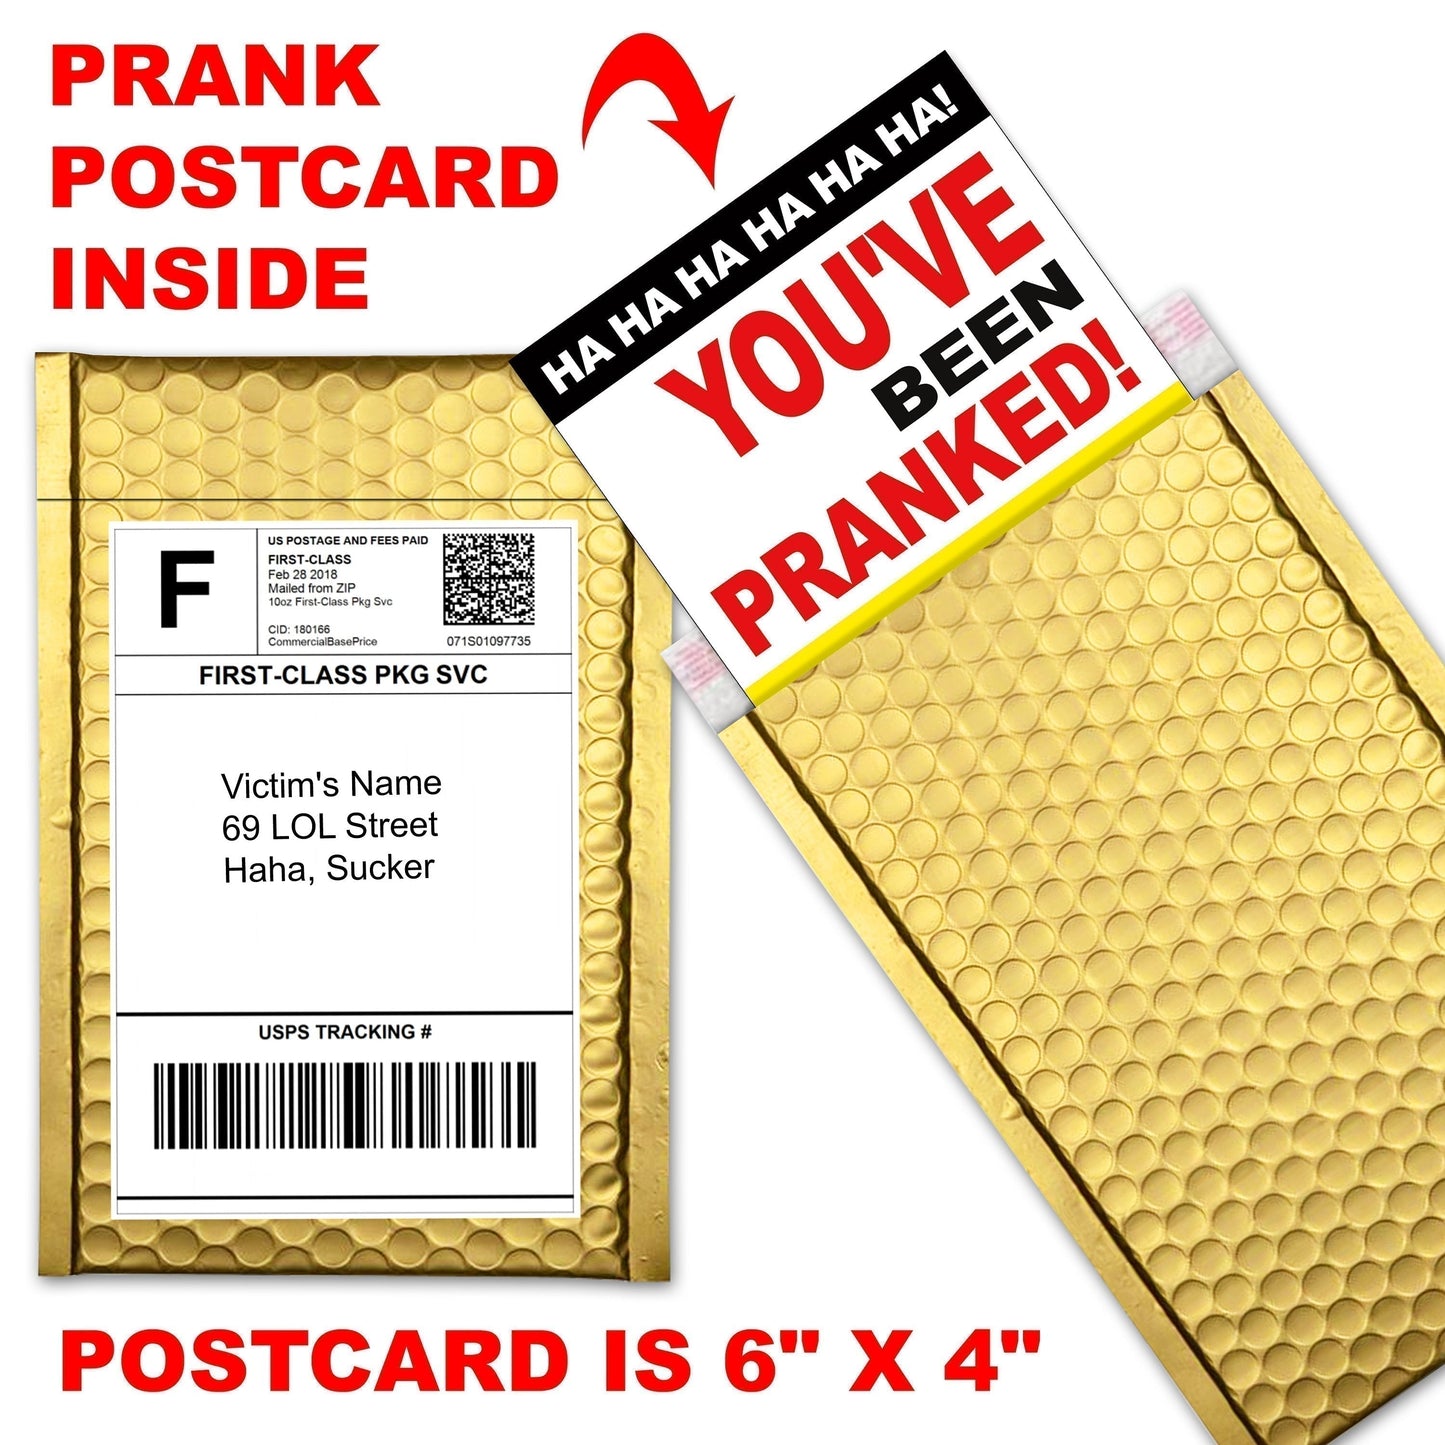 Naked Safari embarrassing prank envelope gets mailed directly to your victims 100% anonymously!